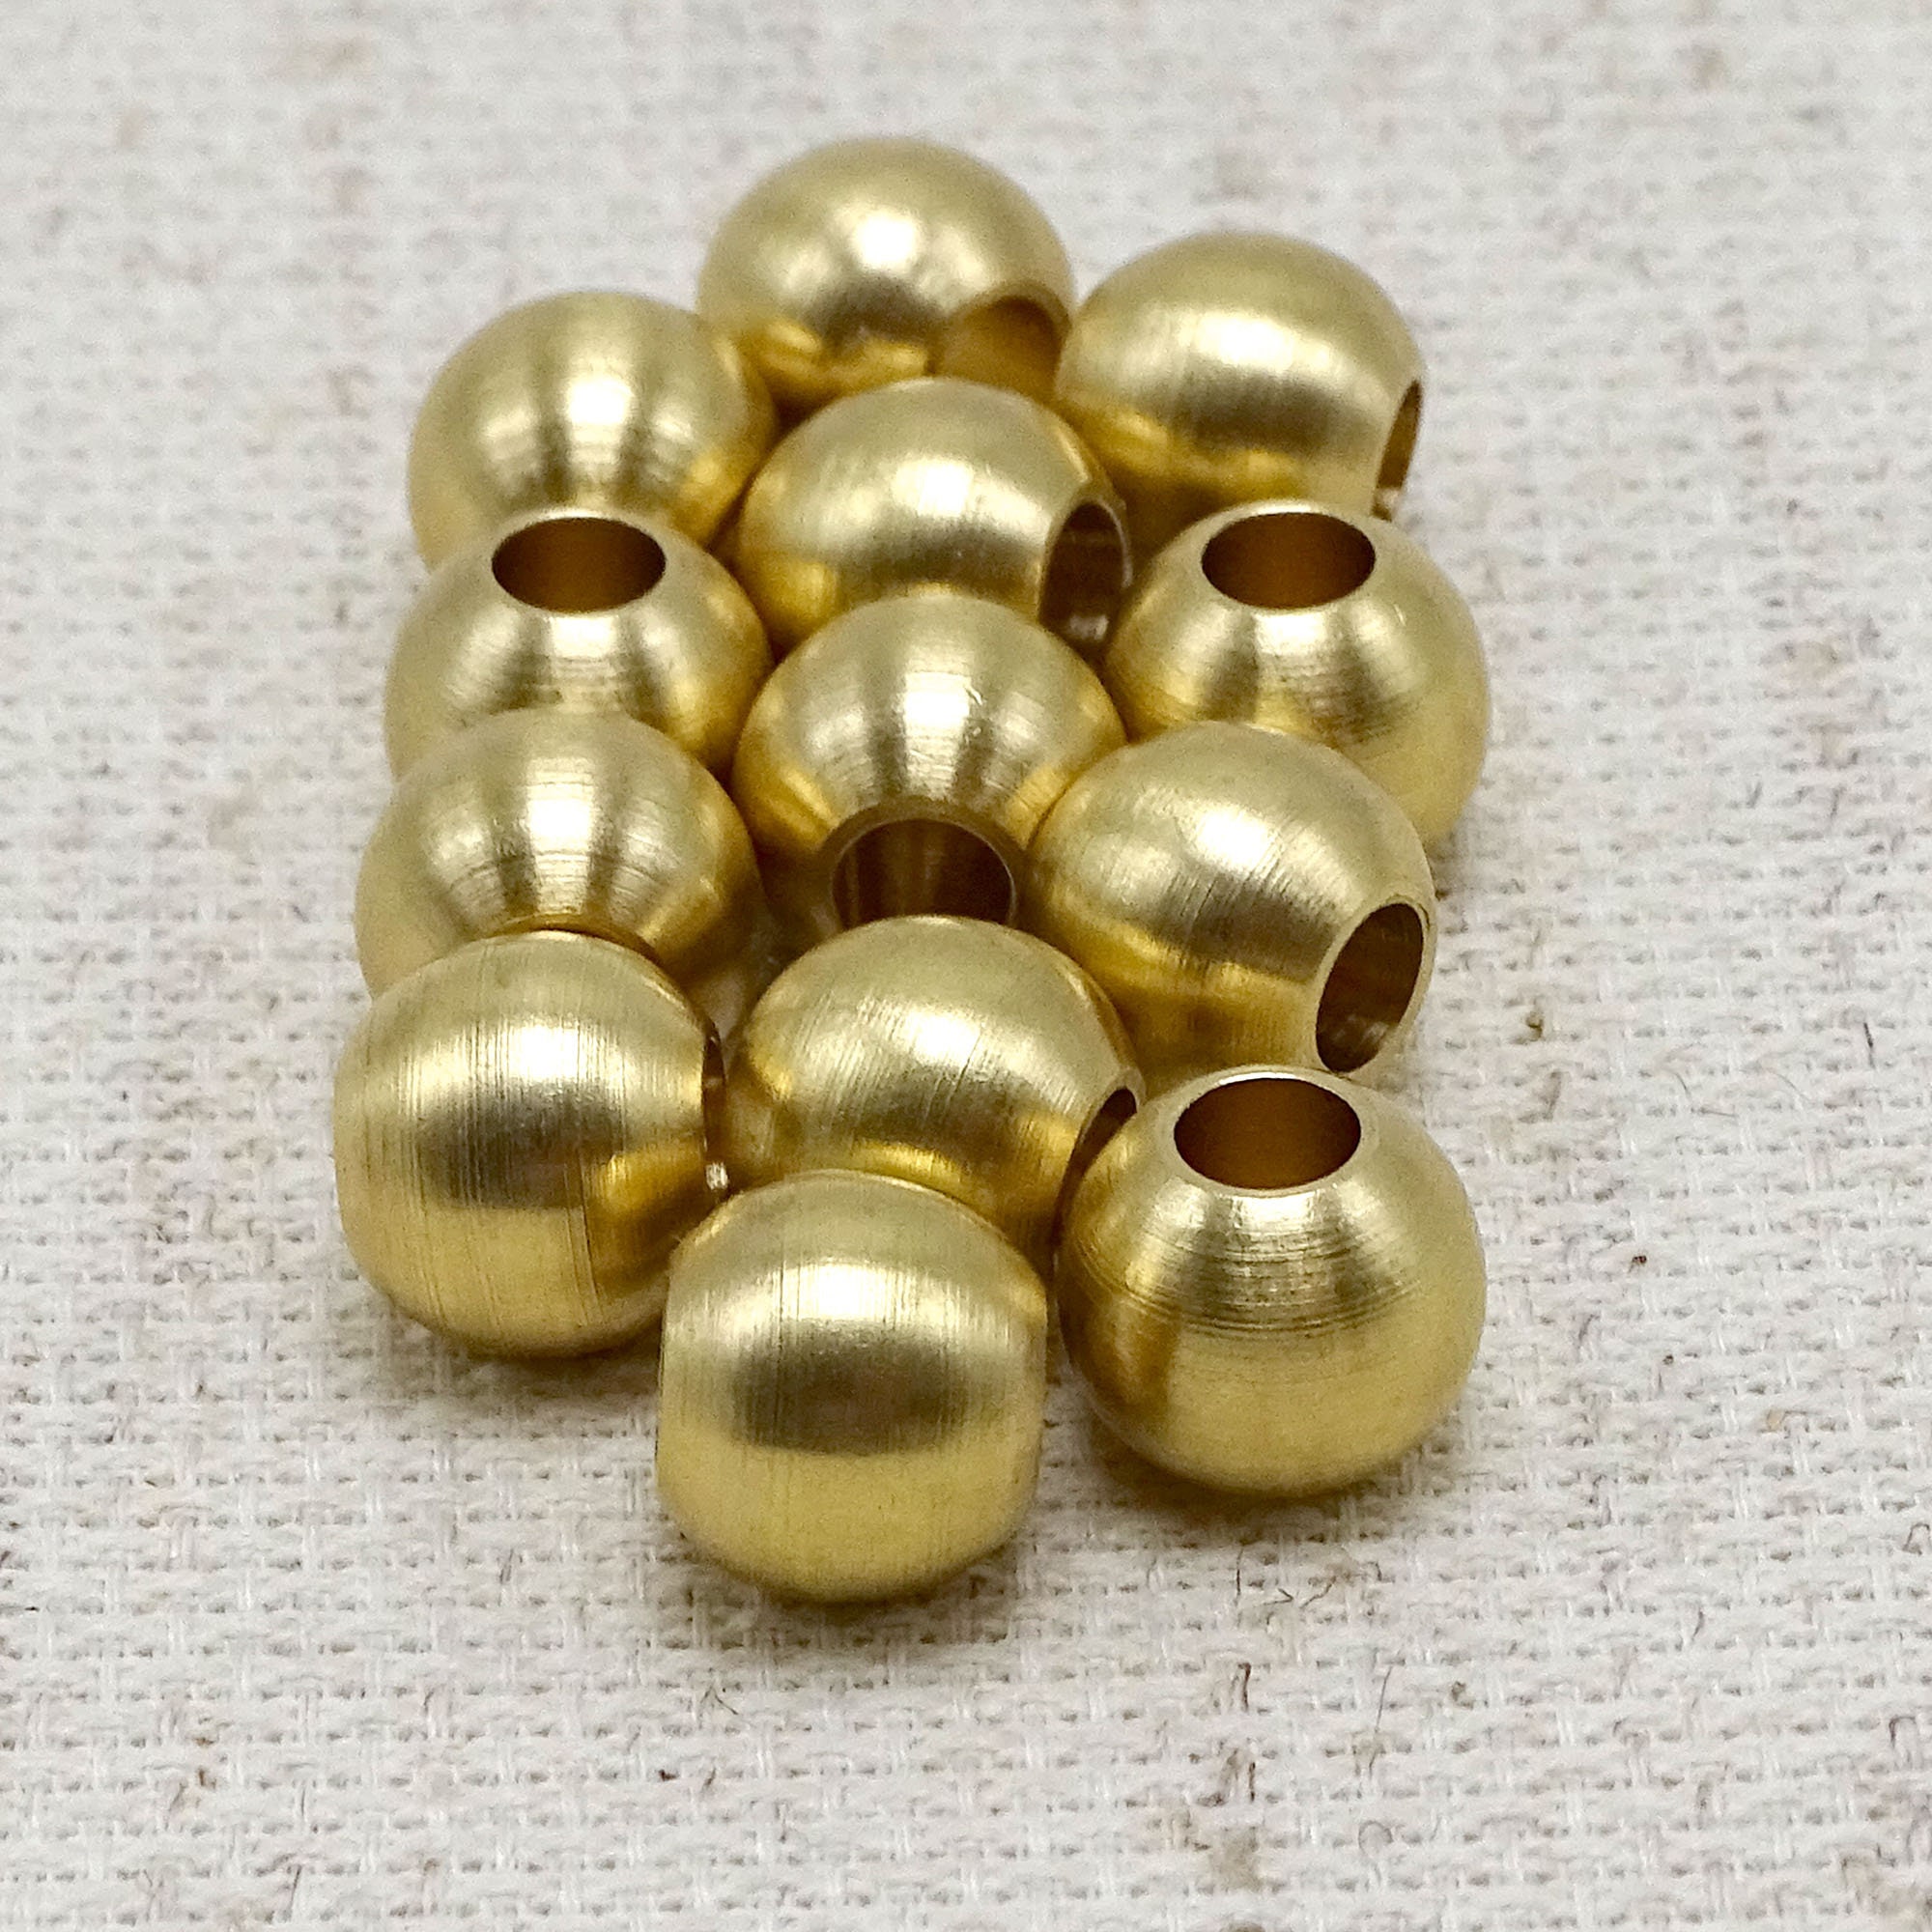 18mm Raw Round Unfinished Wooden Bead, 7mm Threading Large Hole